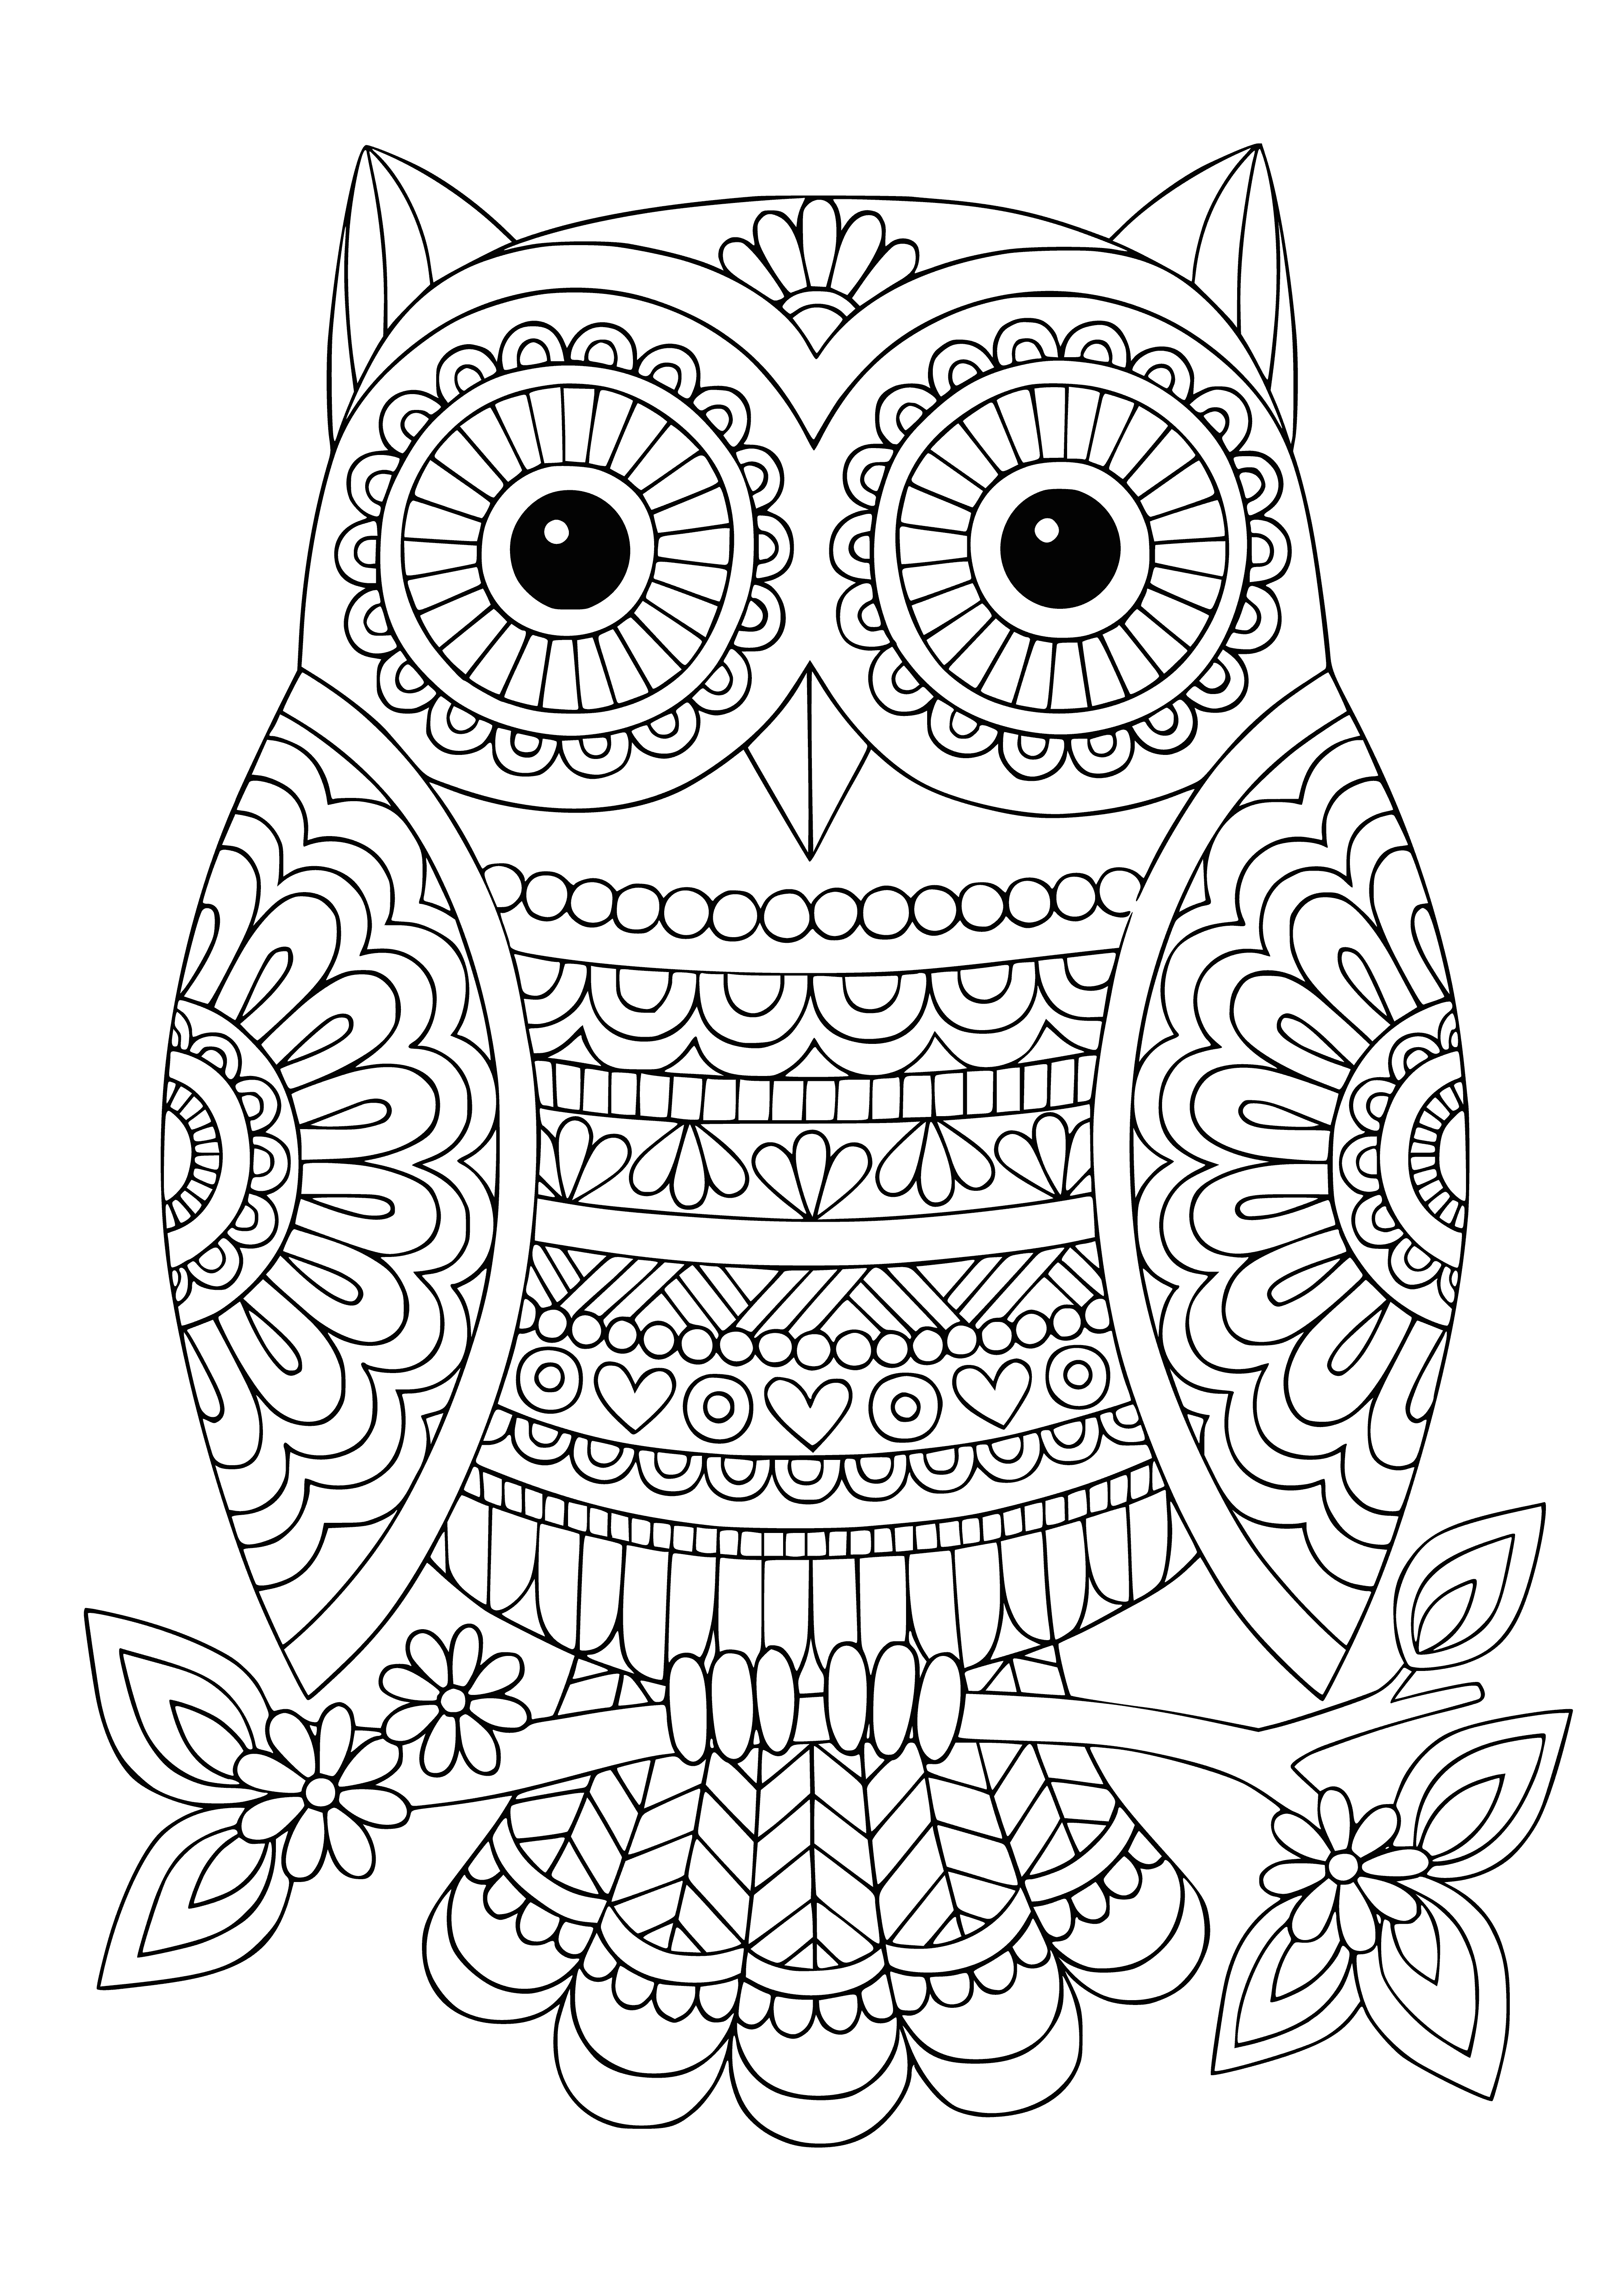 coloring page: Owl perched on a branch looking off into the distance with large round eyes and prominent beak, light-colored feathers and spread out wings. #coloringpage